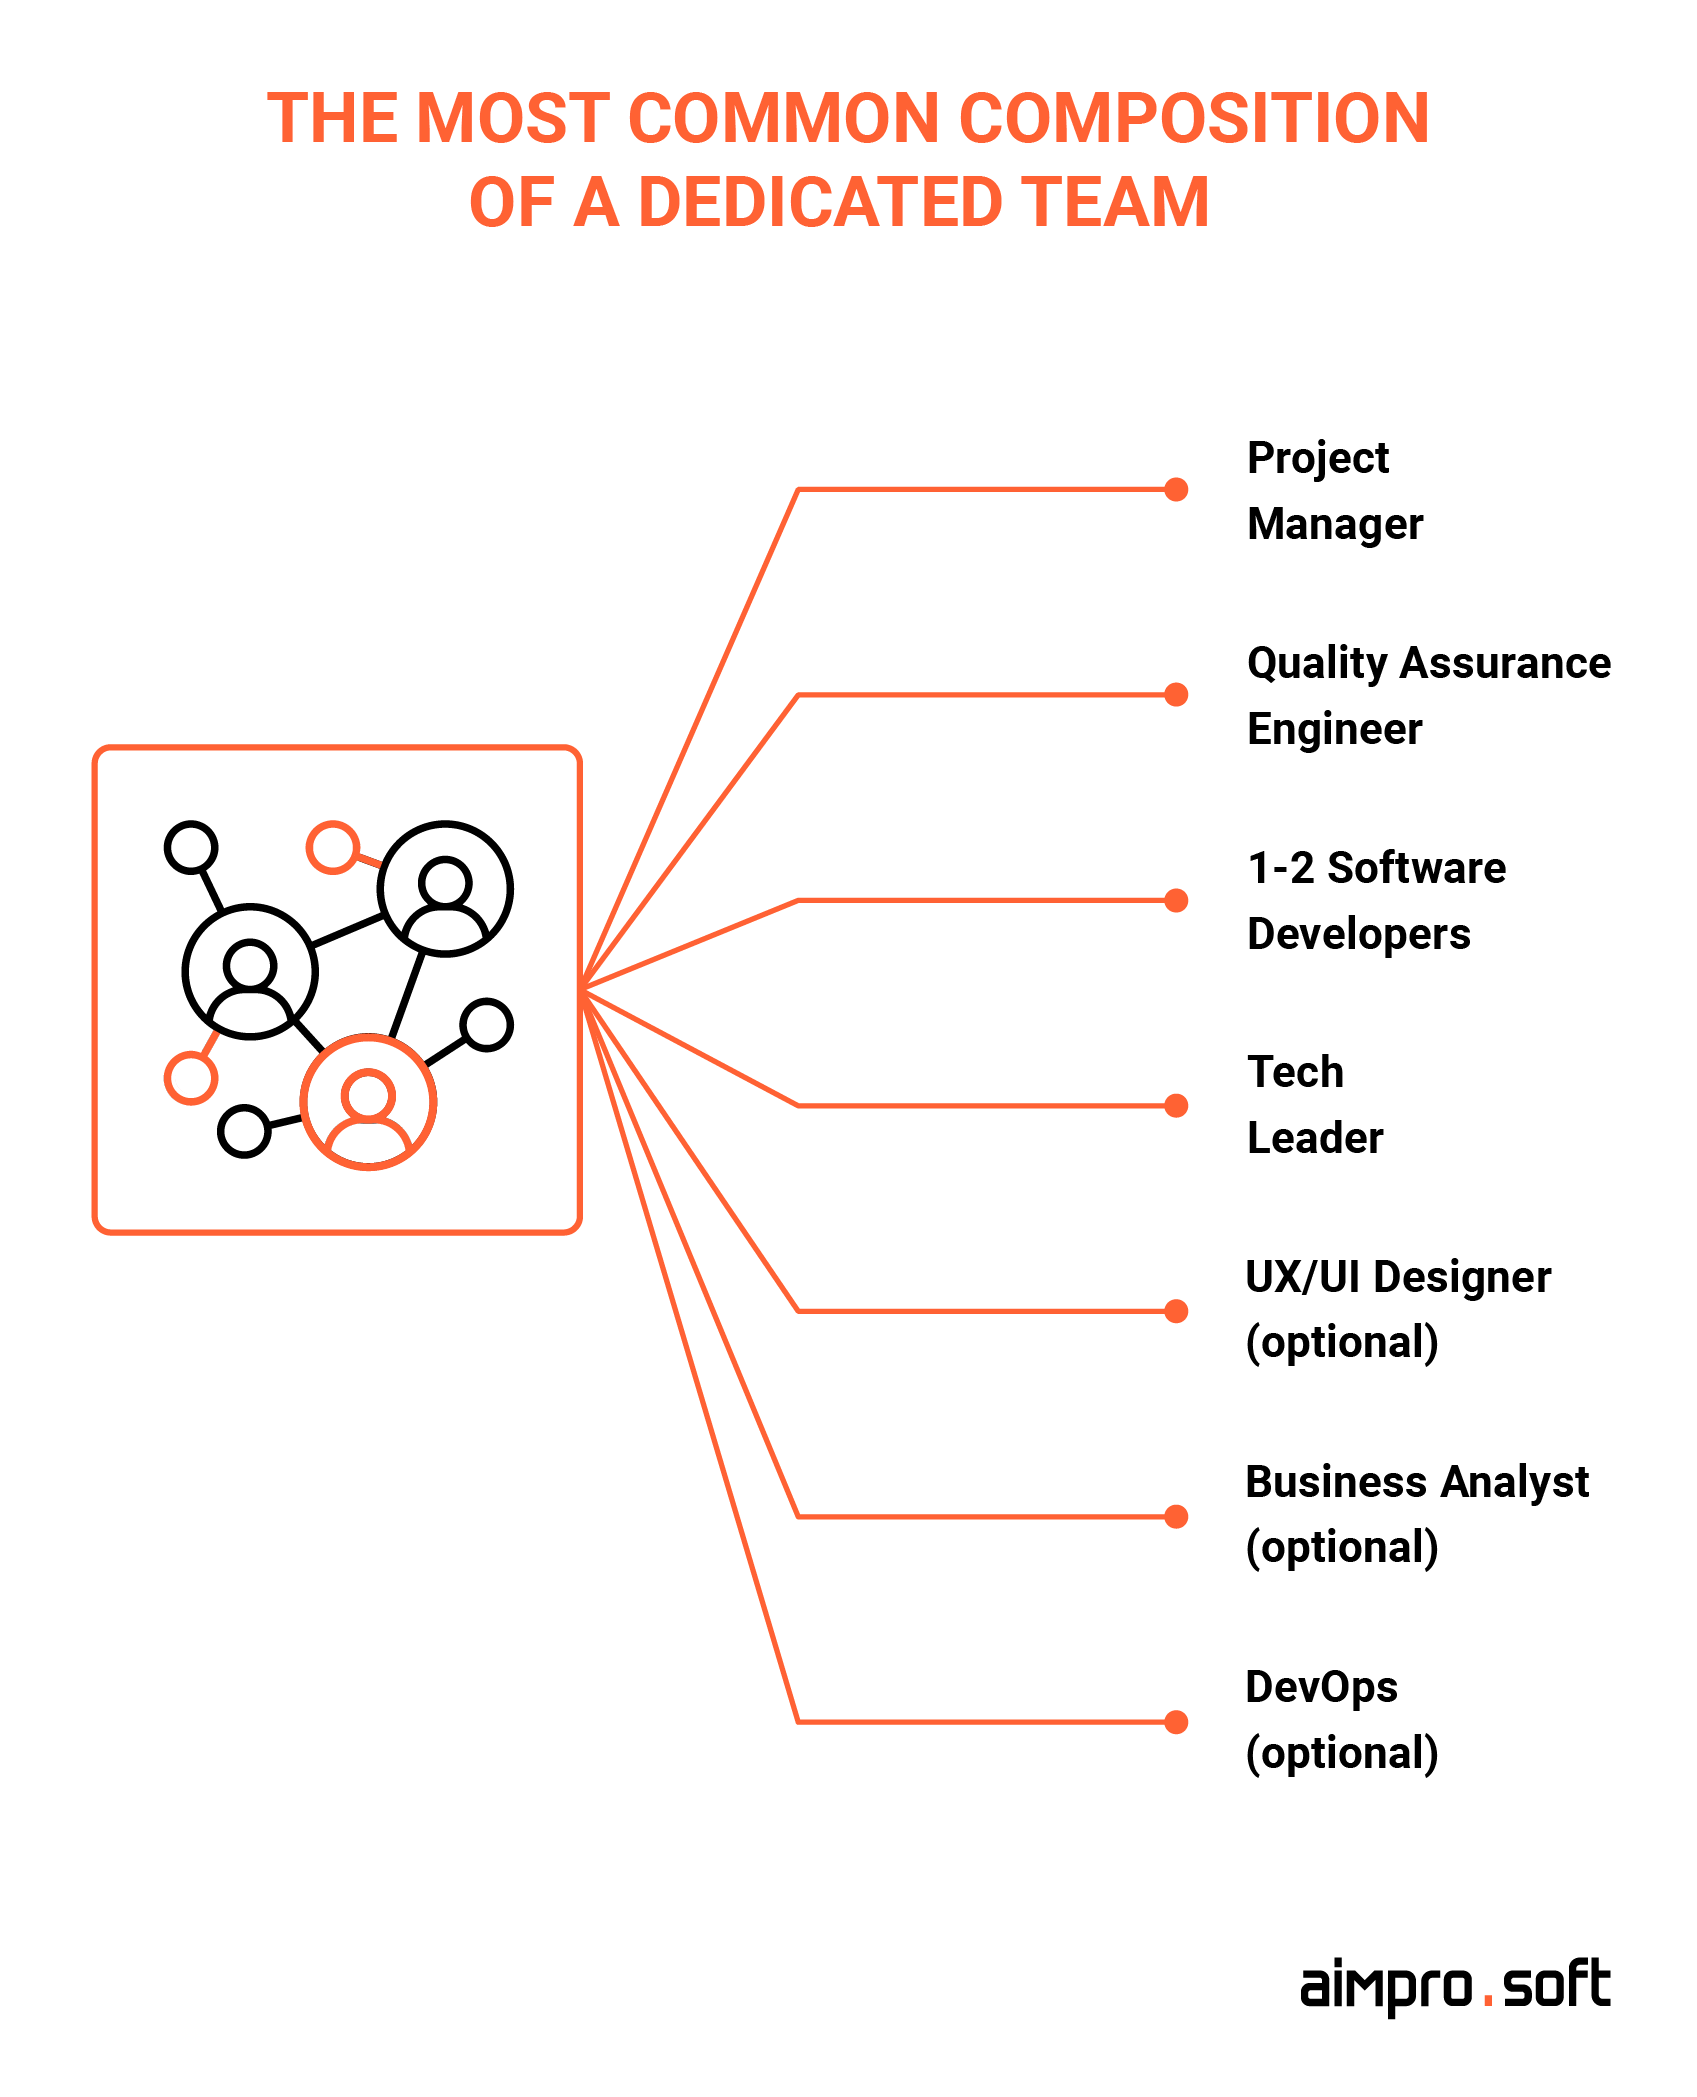 Structure of dedicated teams